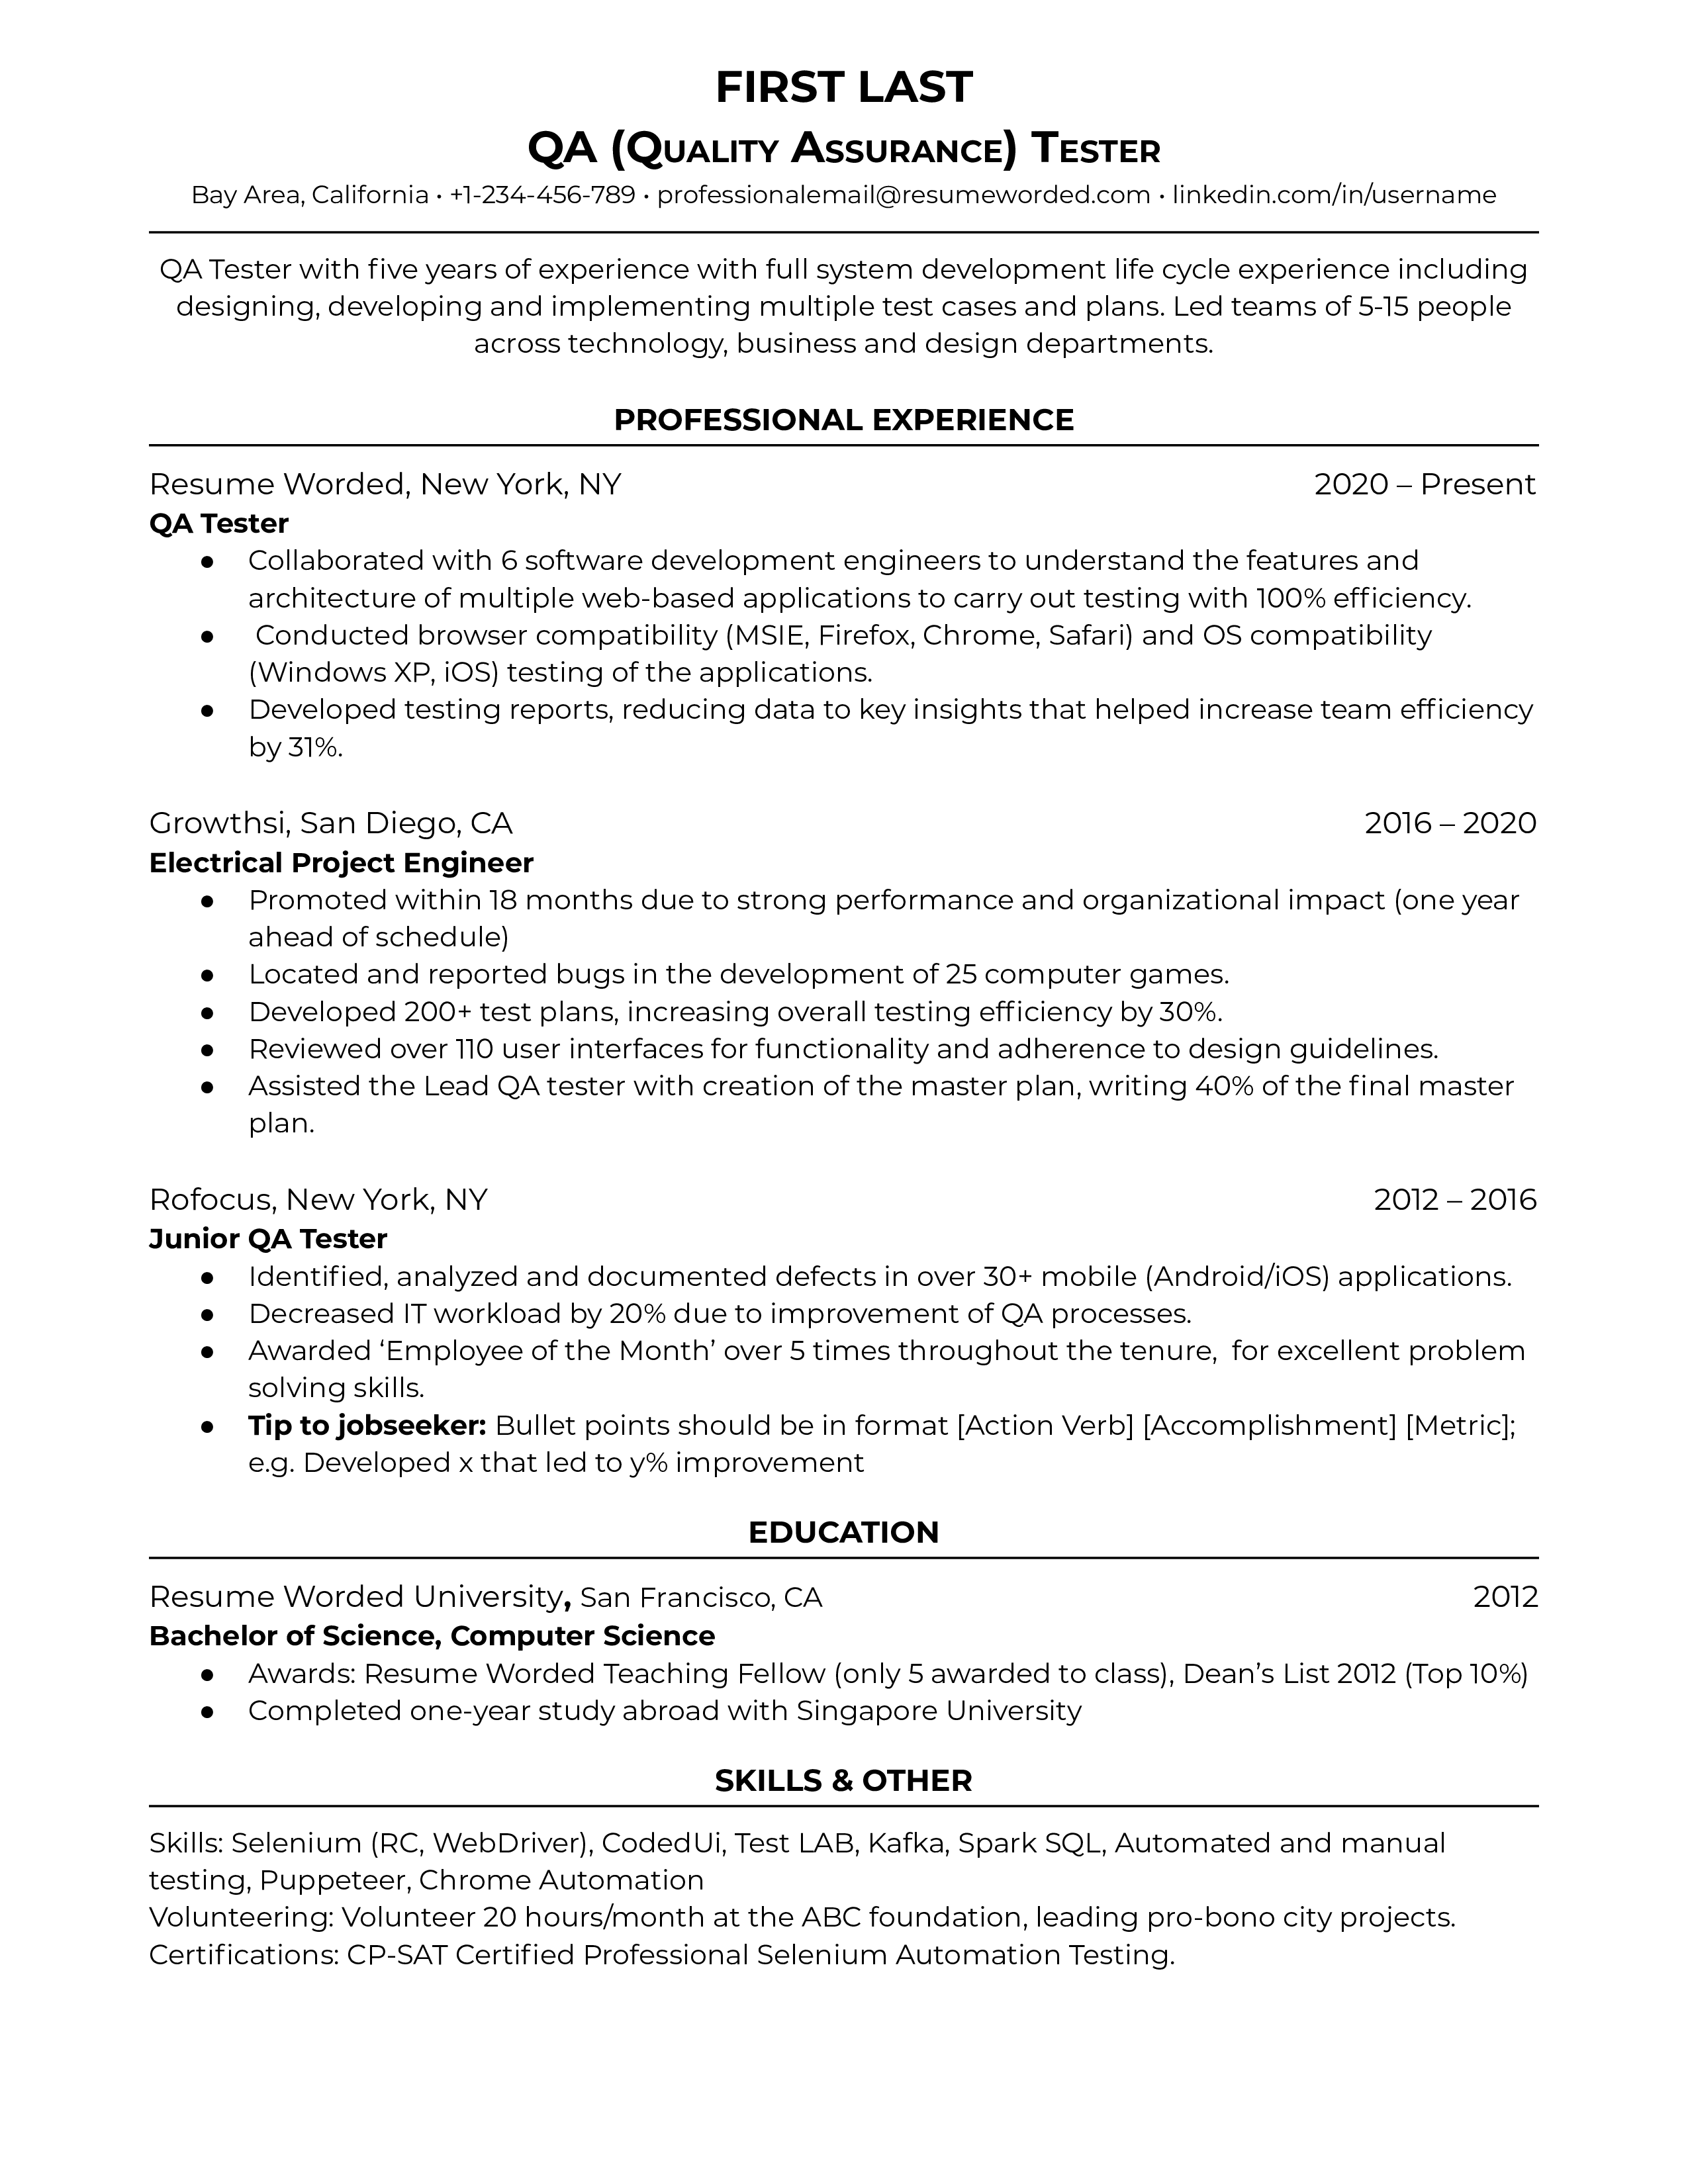 A sample QA Tester resume with a focus on teamwork, identifying bugs, and creating reports.
